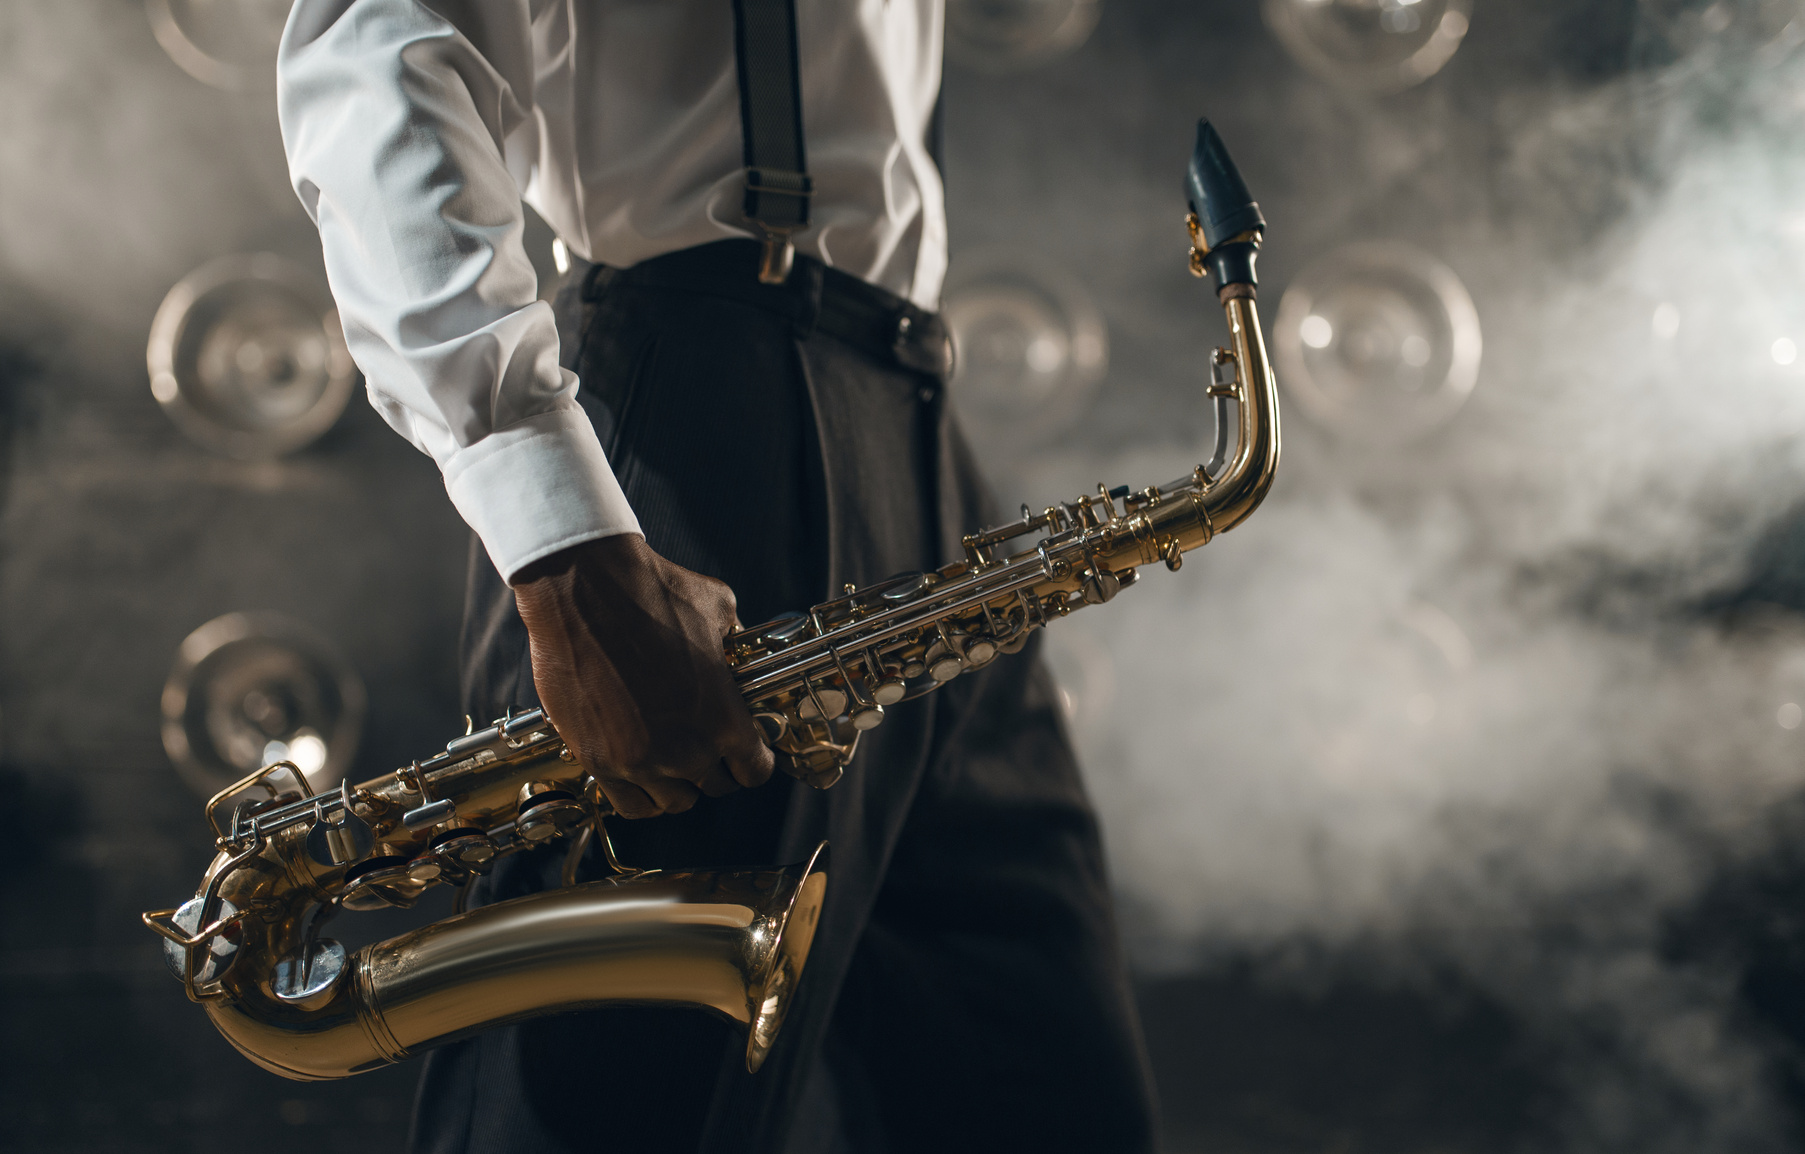 Black Jazz Musician with Saxophone on the Stage